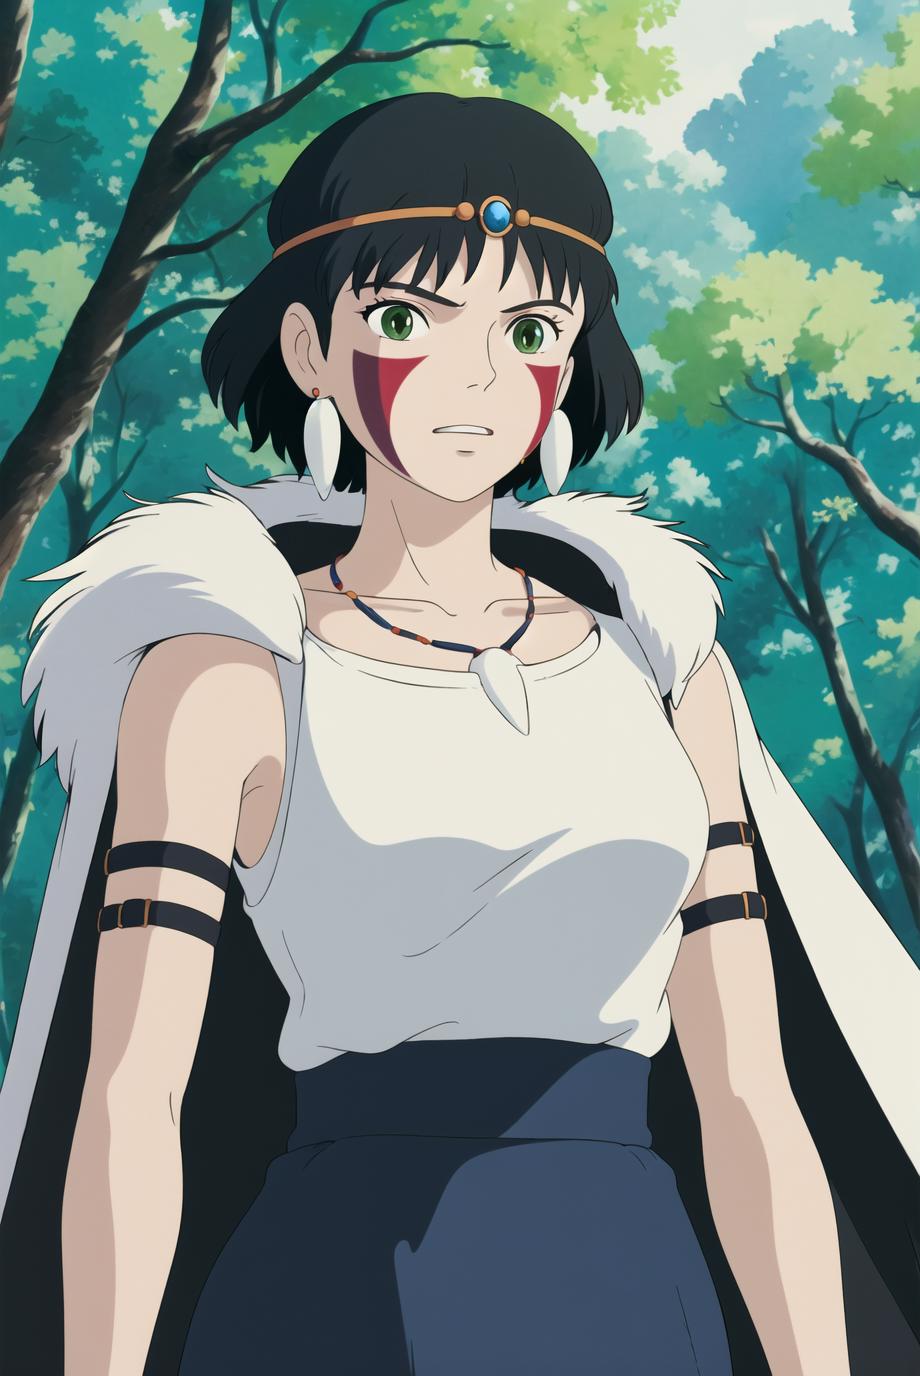 Anime character wearing a white shirt, blue necklace and a headband.